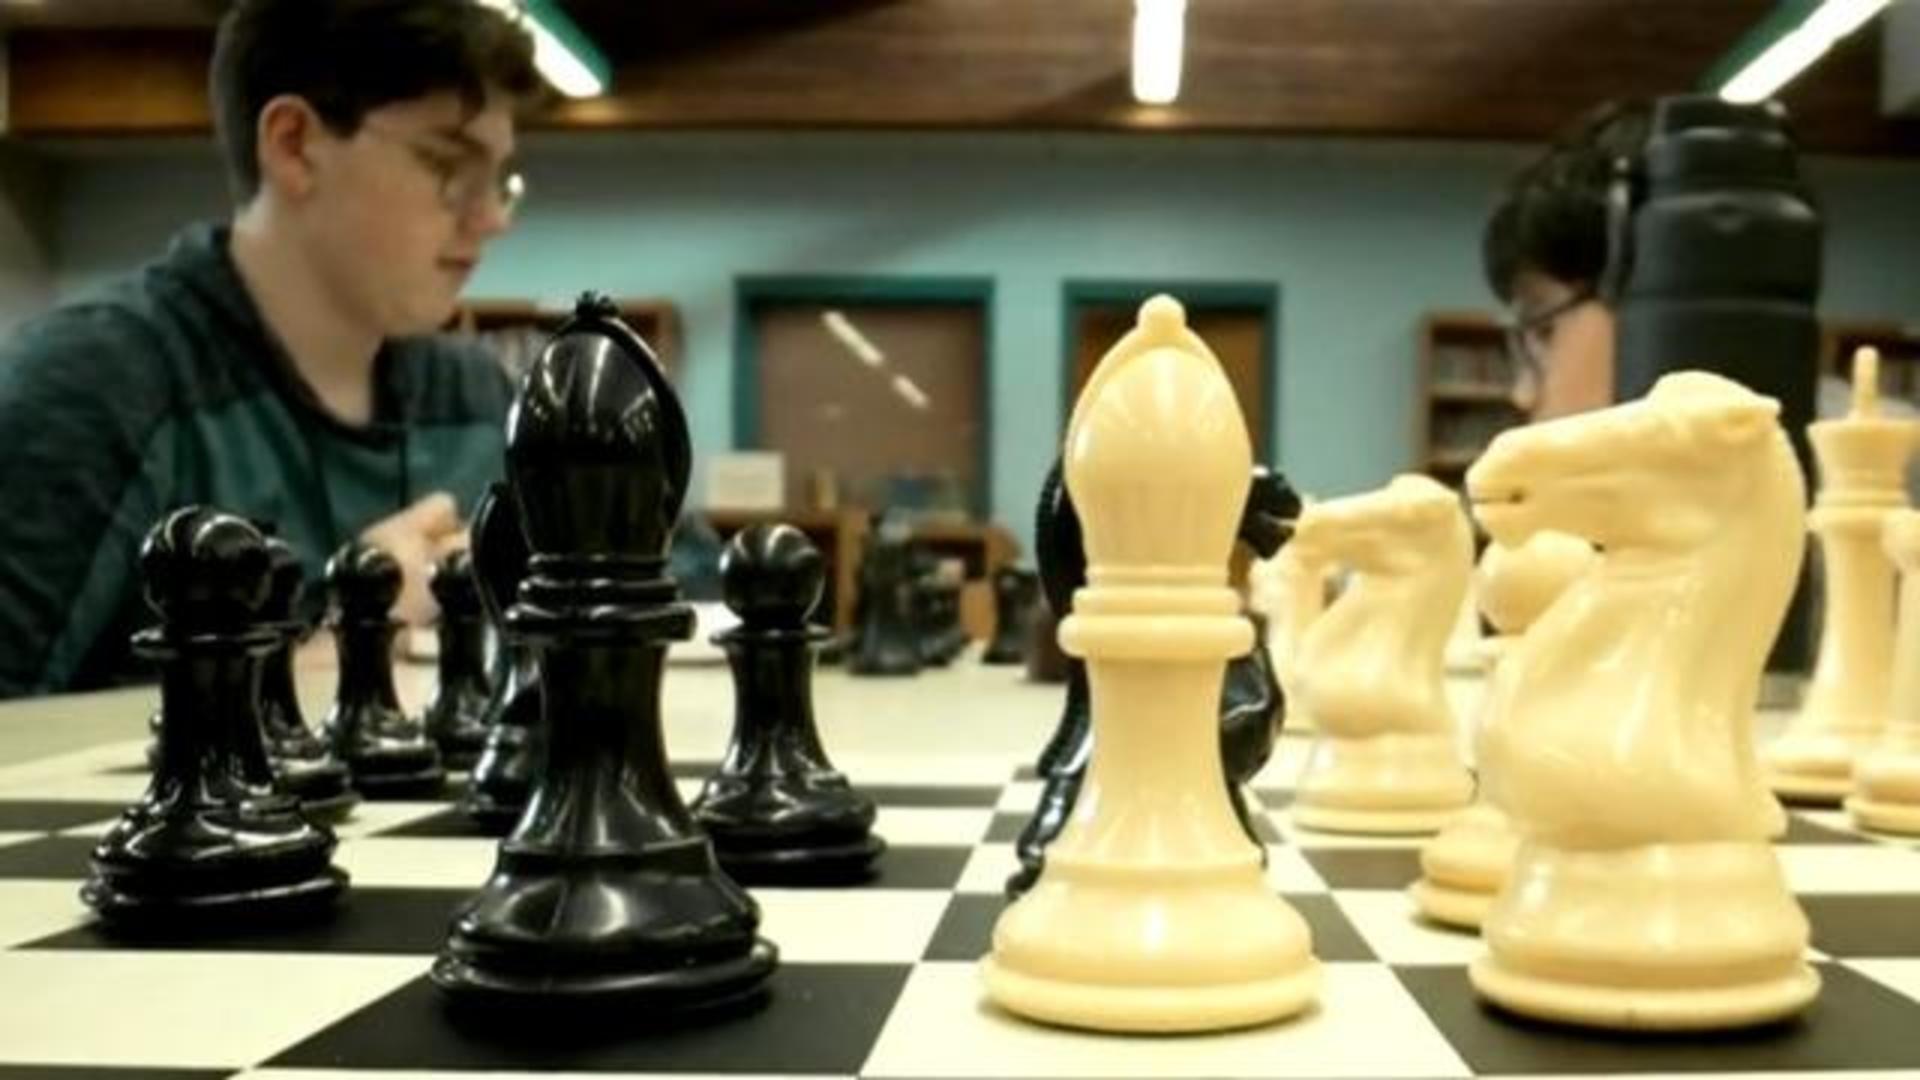 Play the Morris Gambit! - News - ChessAnyTime